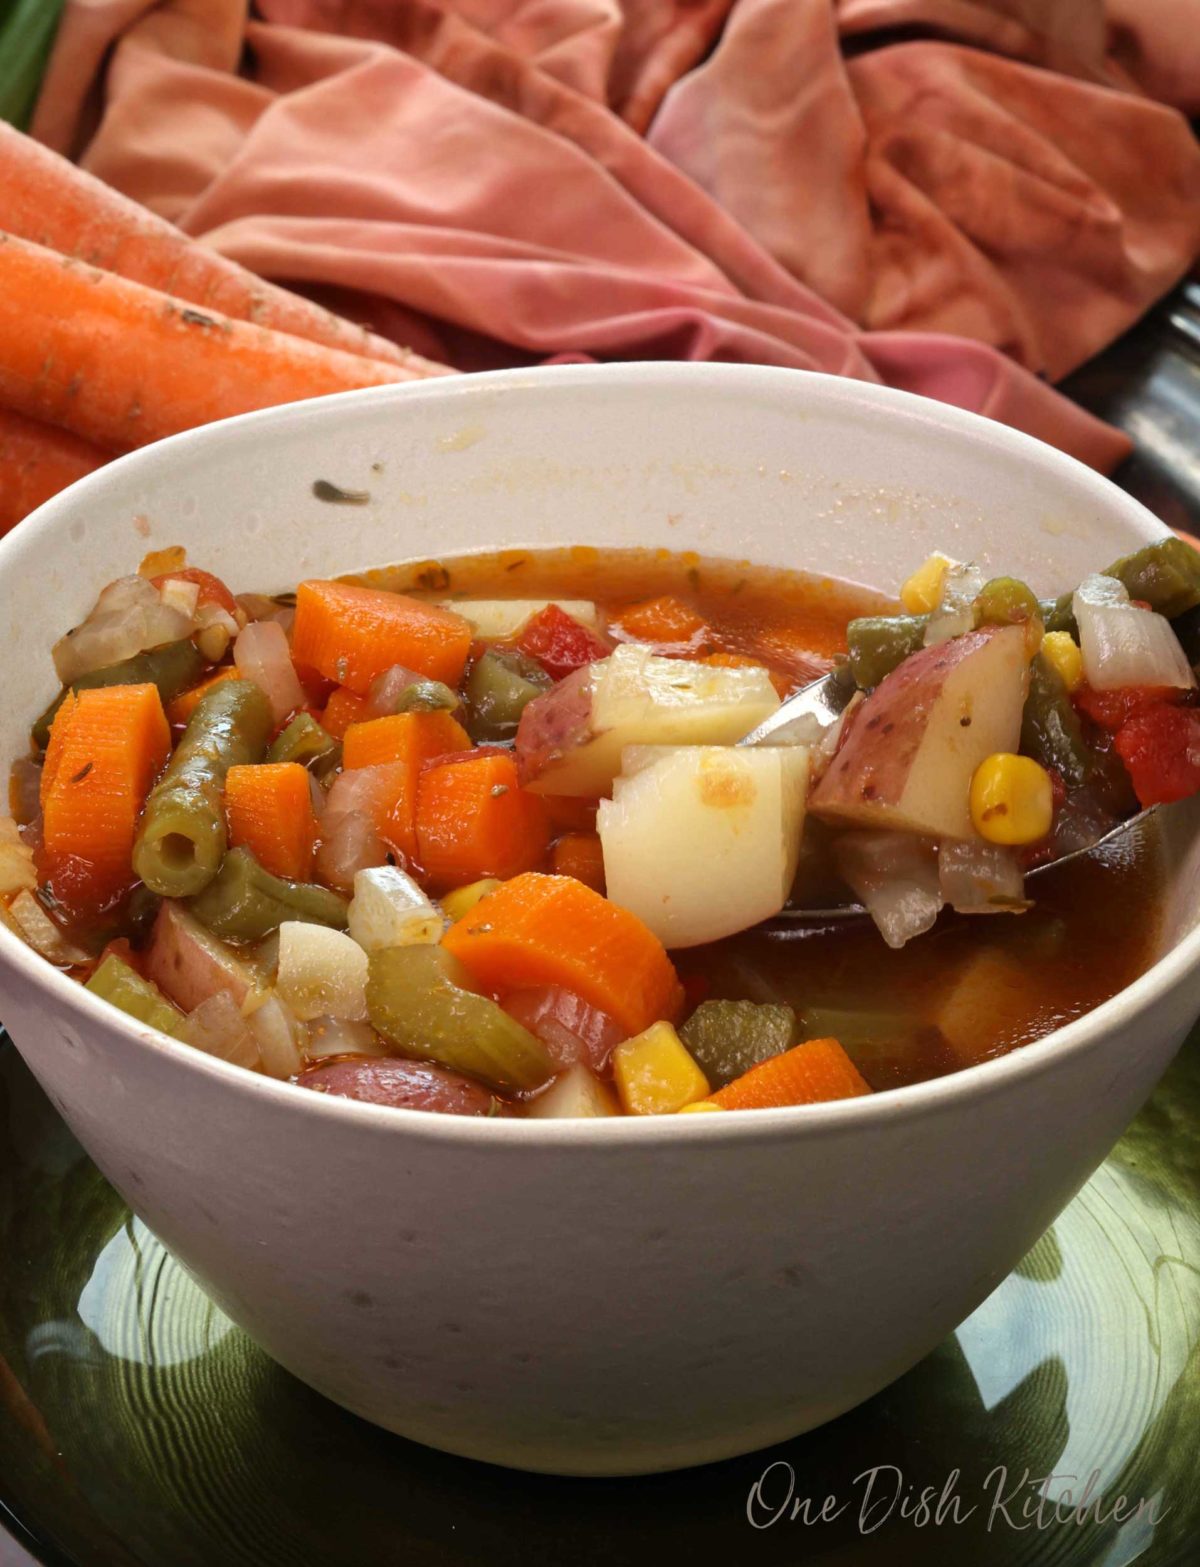 a bowl of vegetable soup with a spoon on the side next to two carrots and an orange napkin.